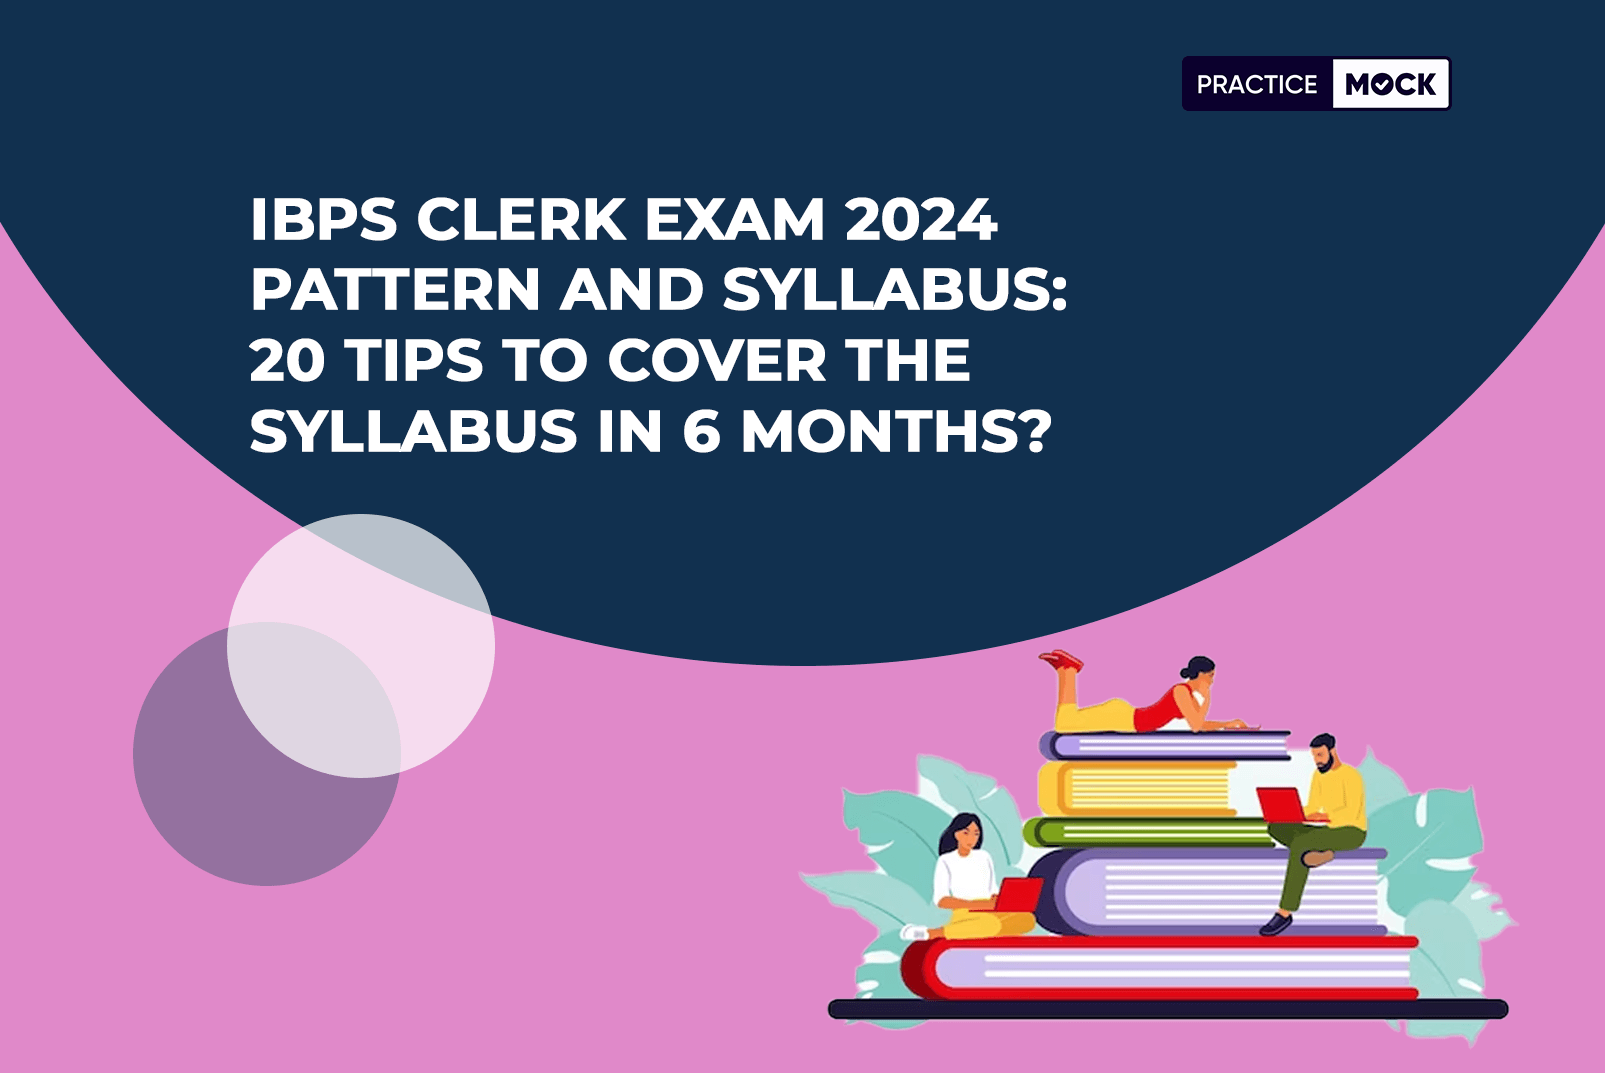 IBPS Clerk Exam 2024 Pattern and Syllabus: 20 Tips to Cover the Syllabus in 6 Months?